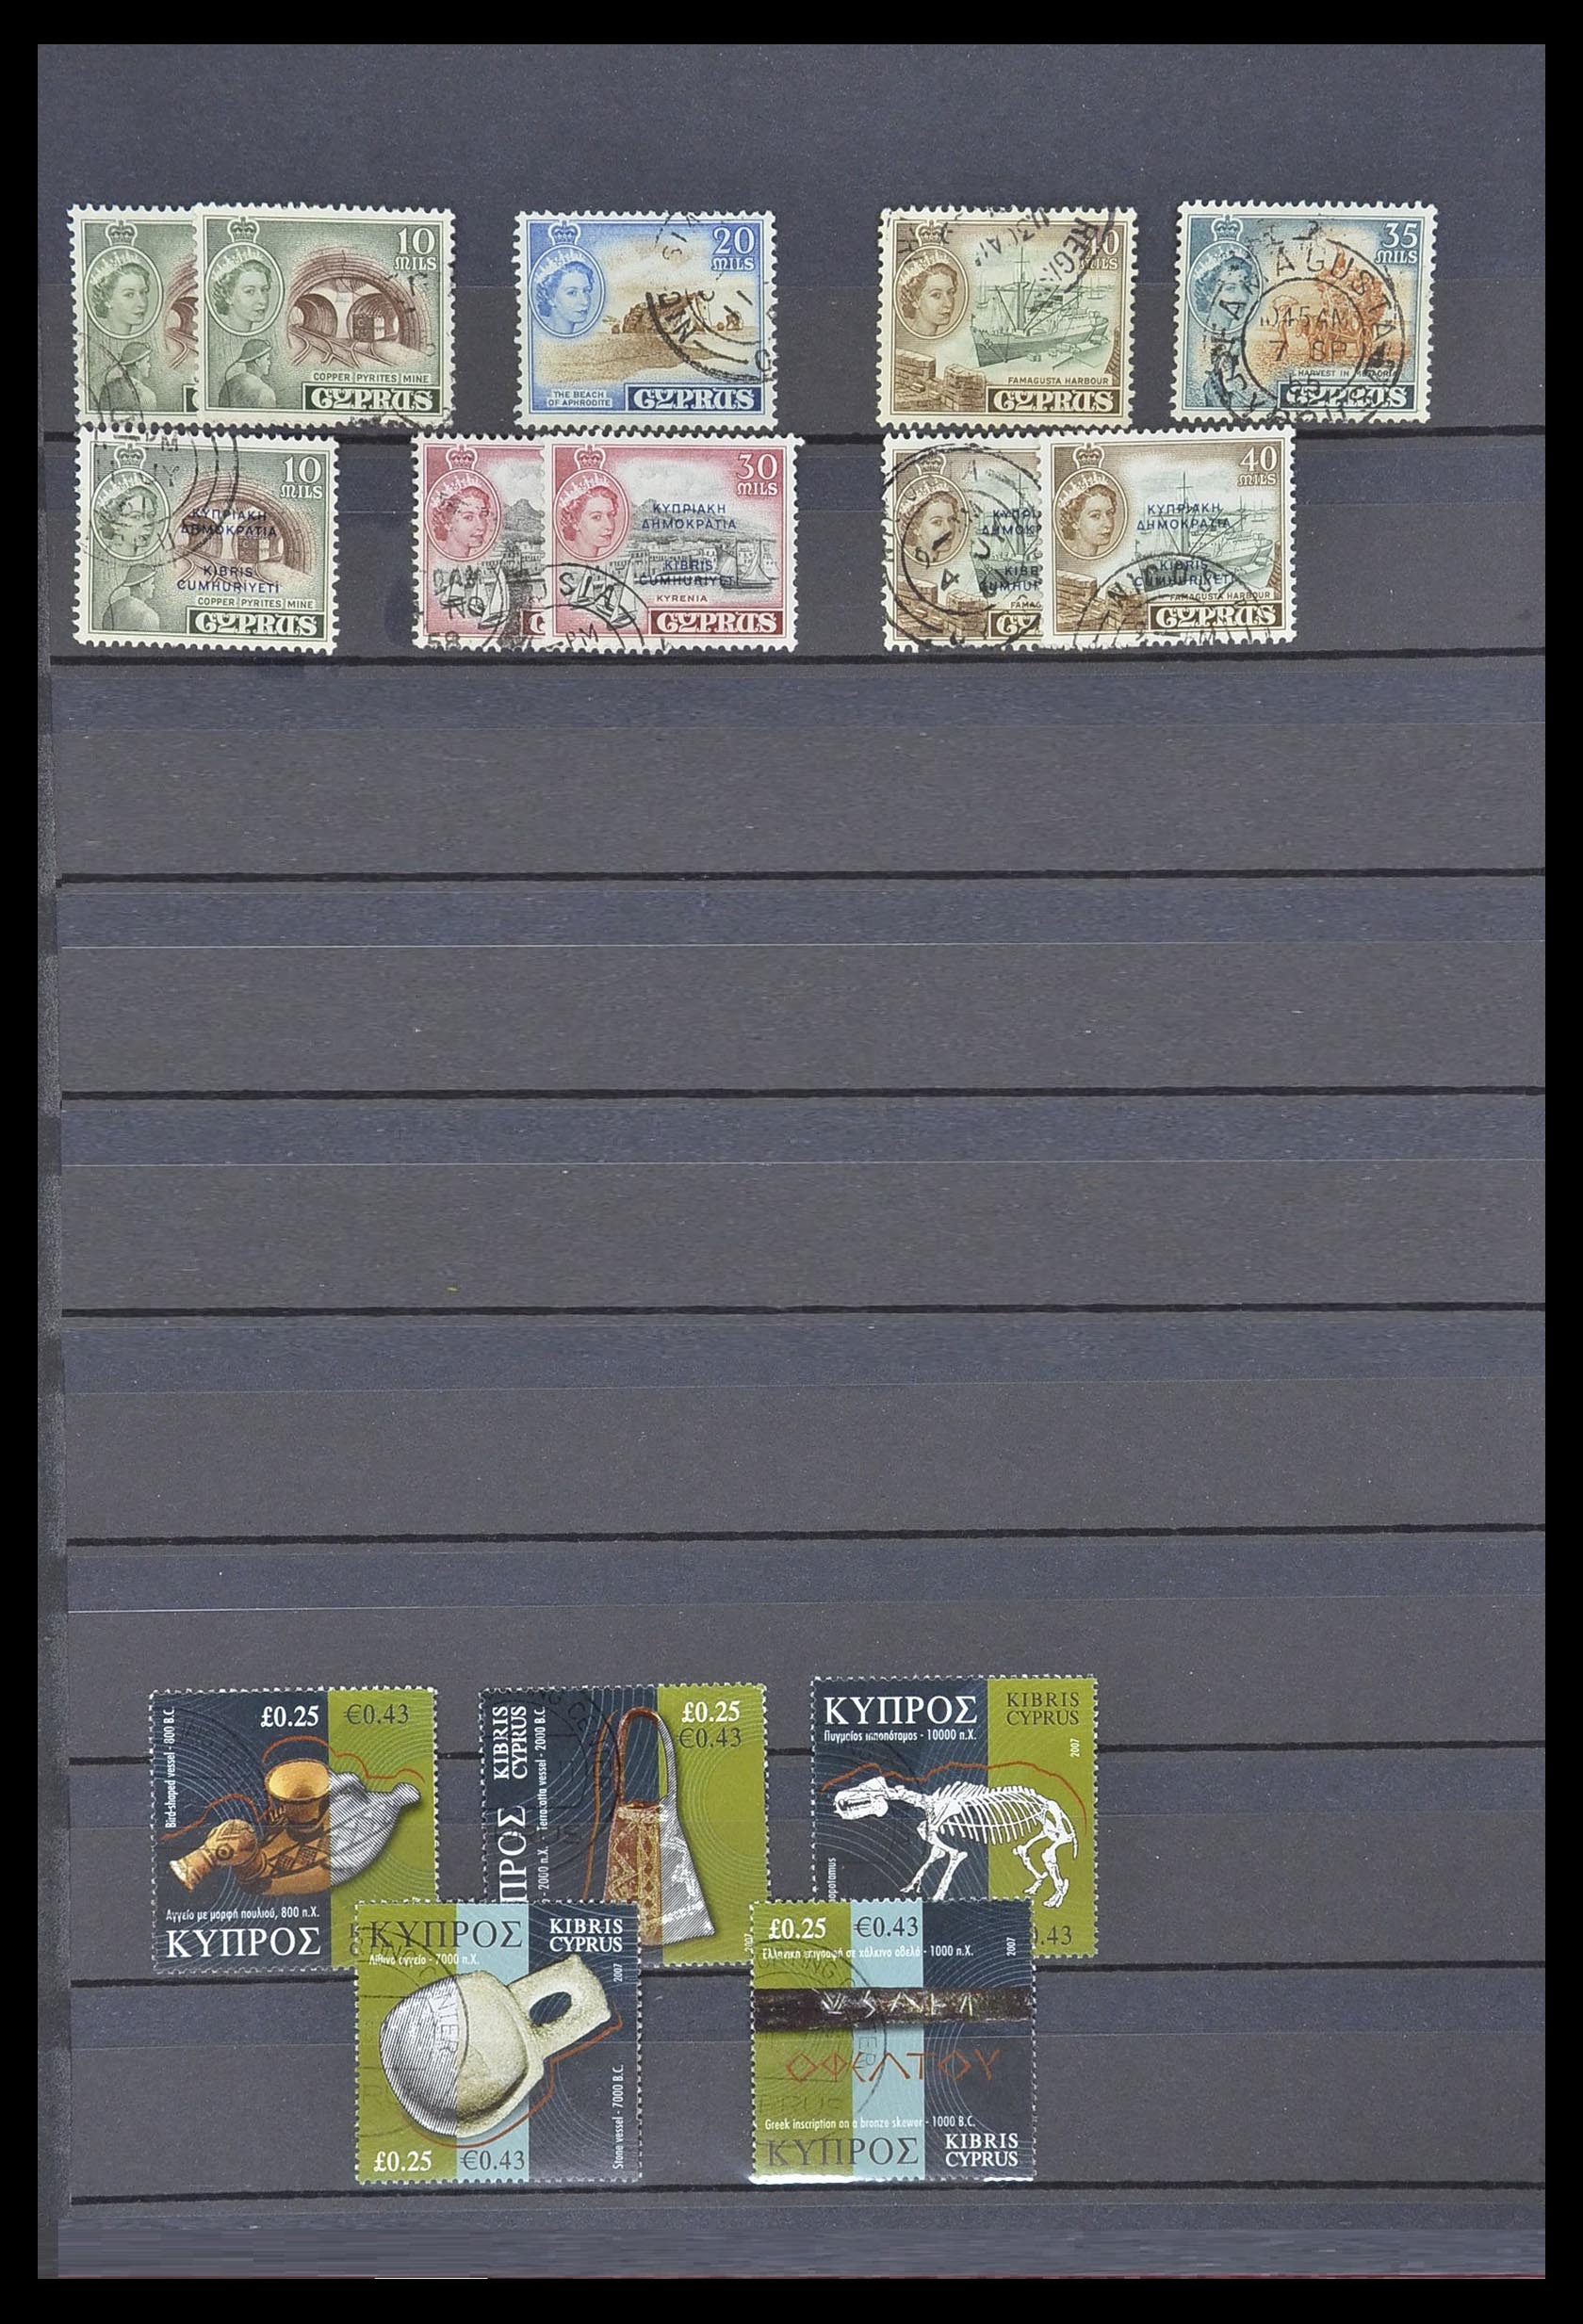 33217 026 - Stamp collection 33217 Cyprus 1955-1988 and Turkish Cyprus 1974-1985.